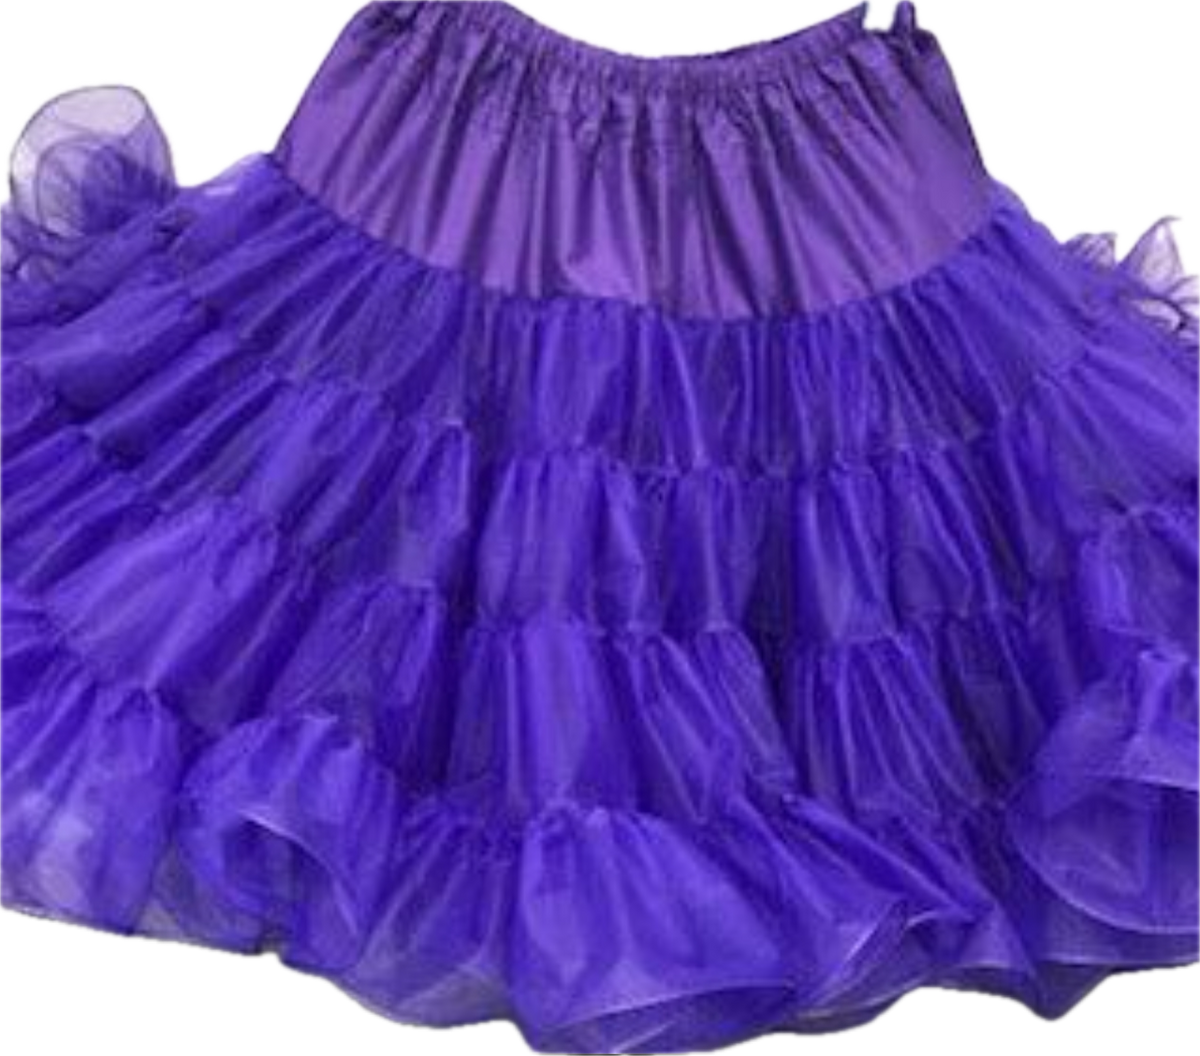 A purple ruffled nylon Organdy Stiff Petticoat skirt on a black background from Square Up Fashions.